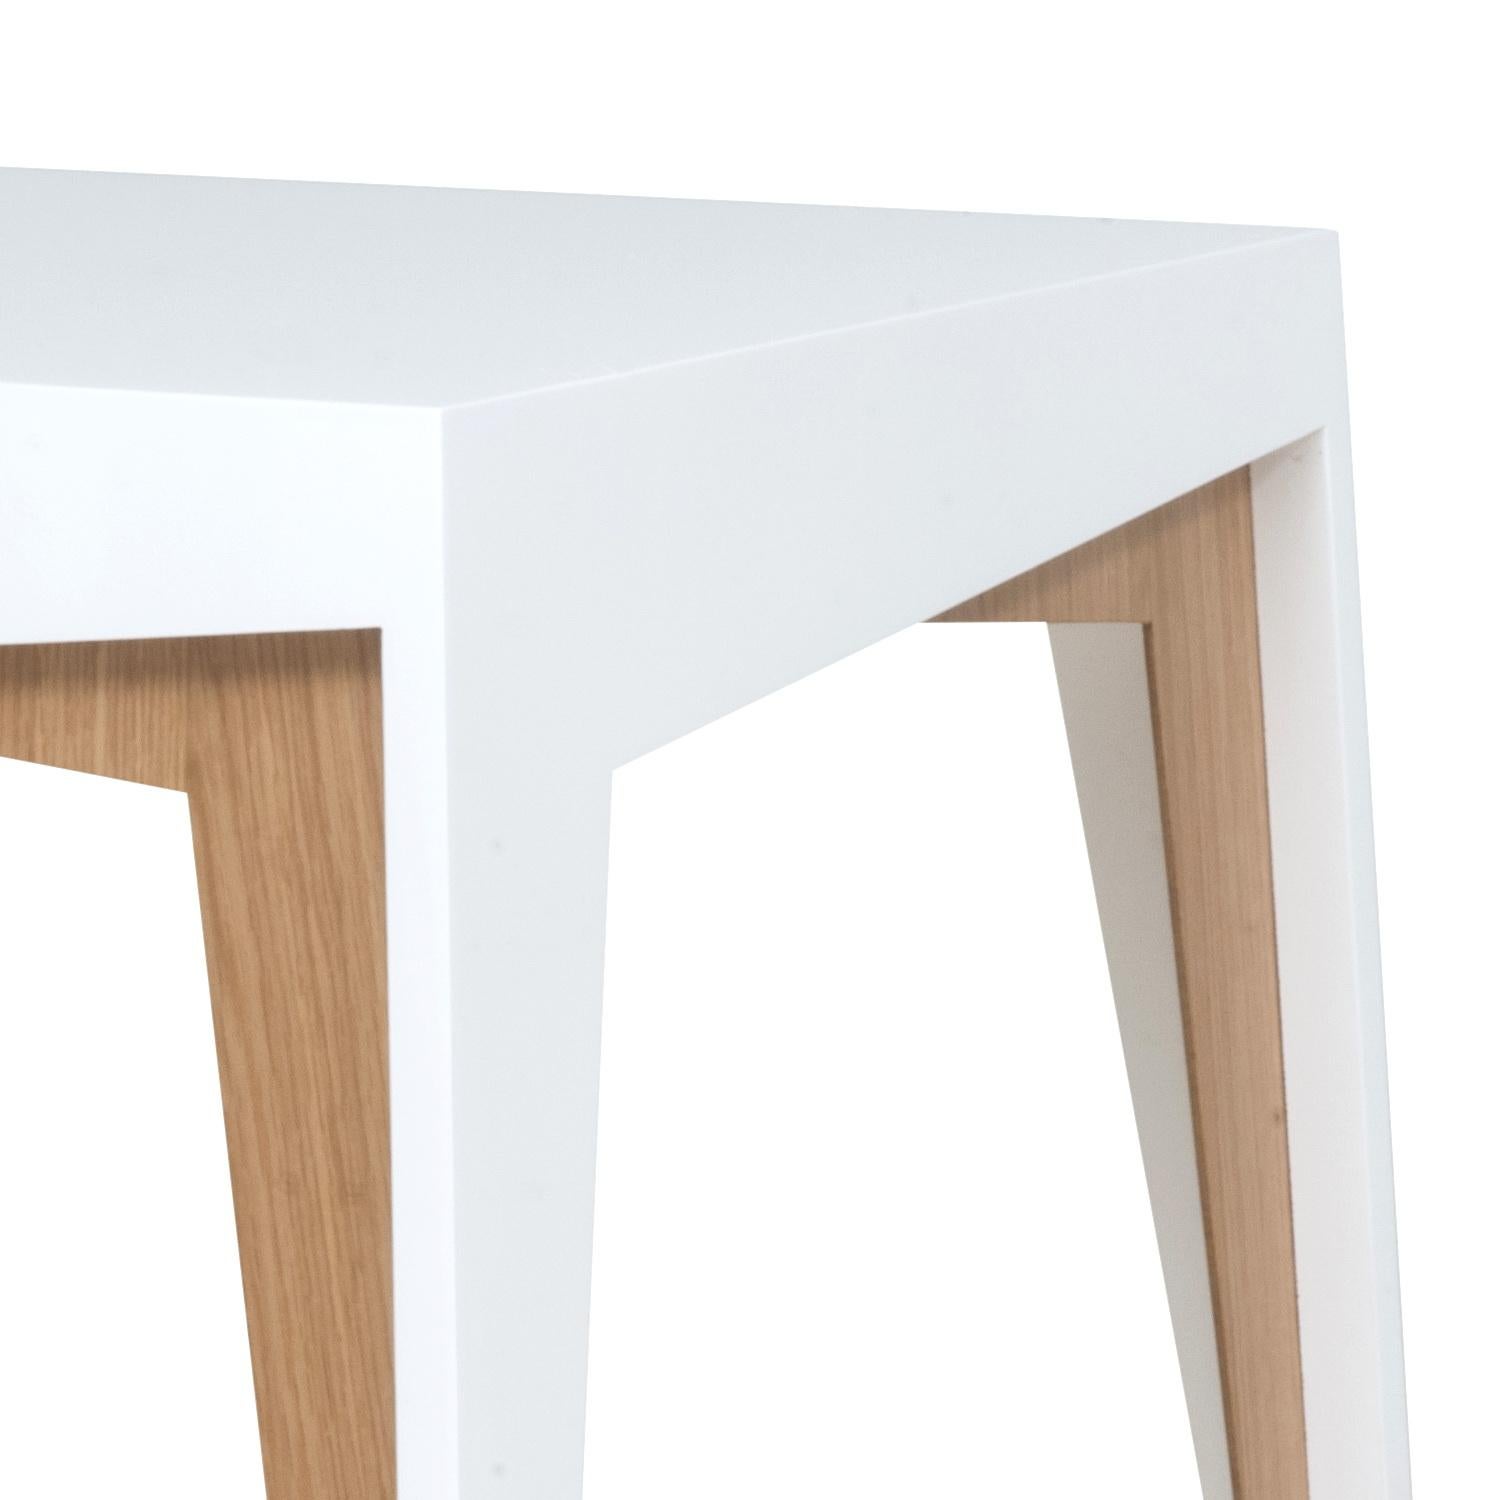 Oculta means hidden in Portuguese. This side table plays with the idea of having a table underneath another table.
(This product consists of only 1 table).